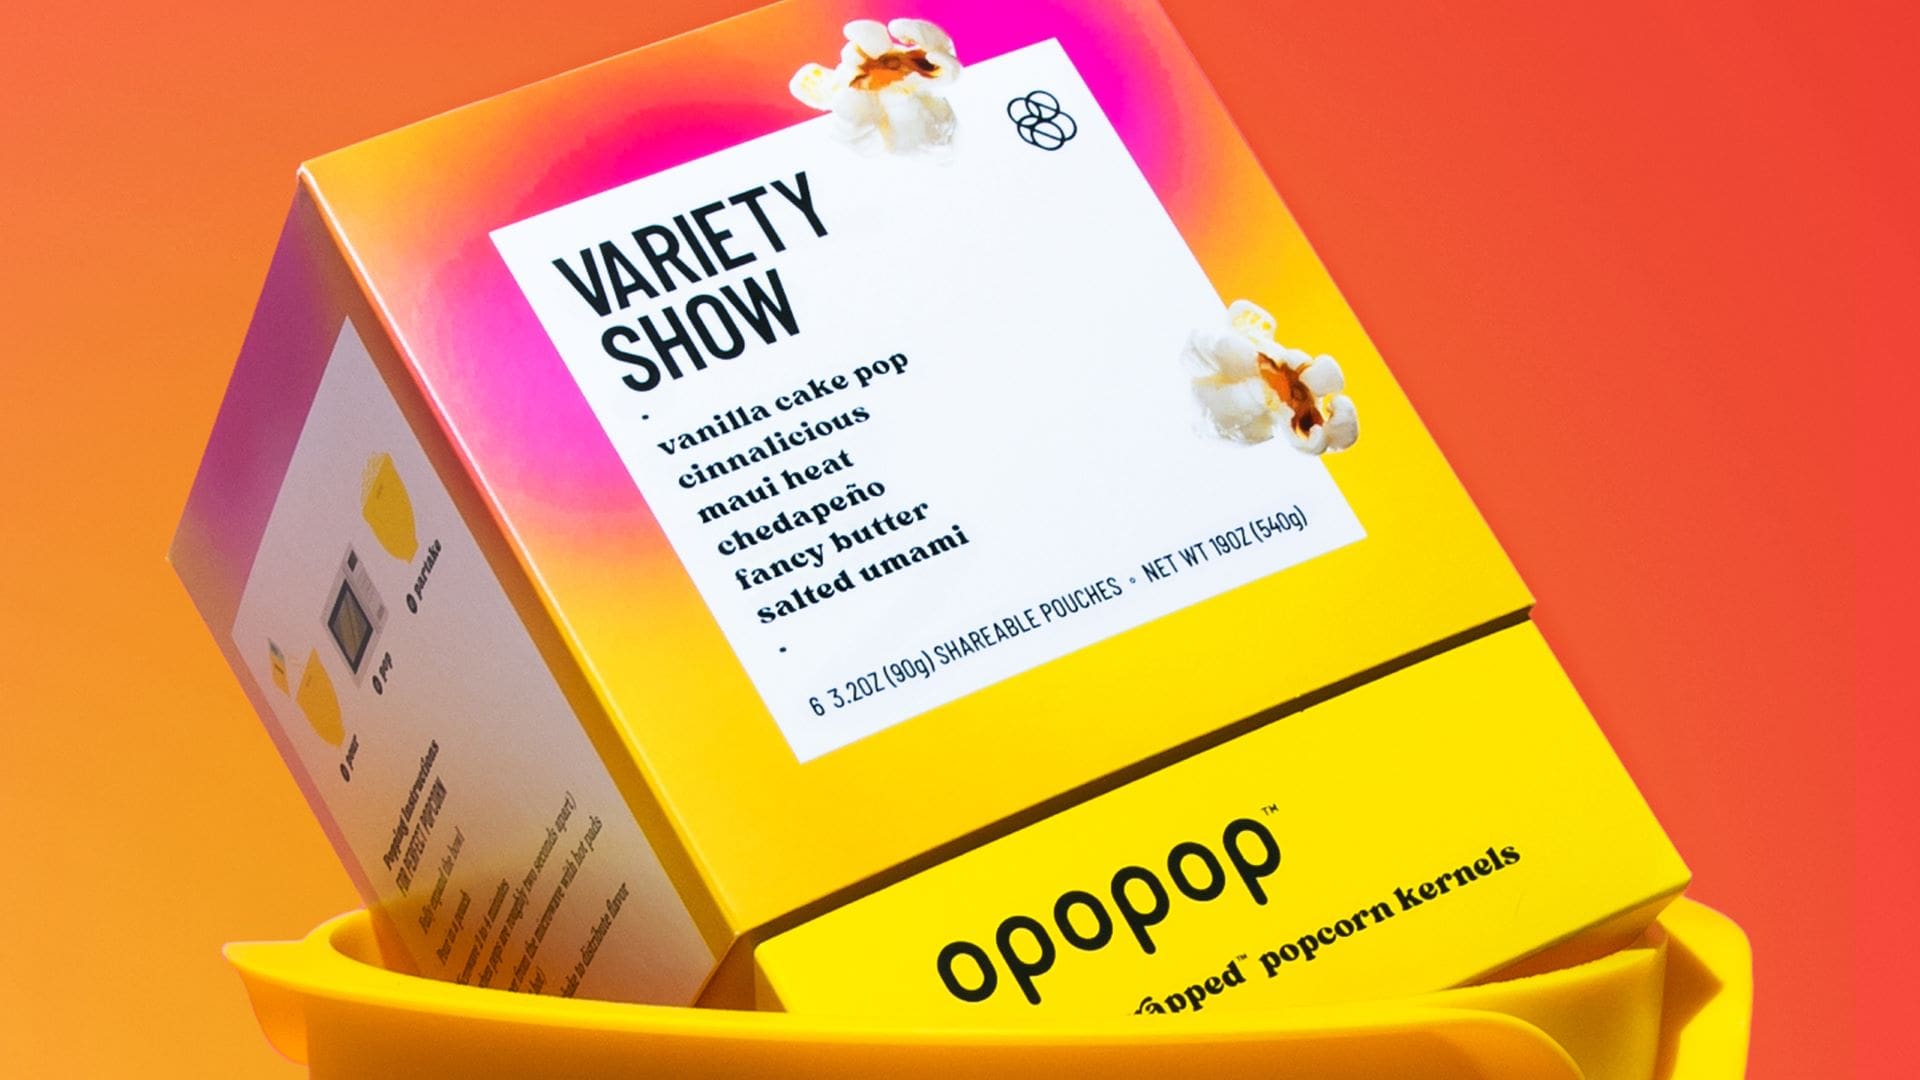 Opopop Review: Yummy Flavor Wrapped Popcorn